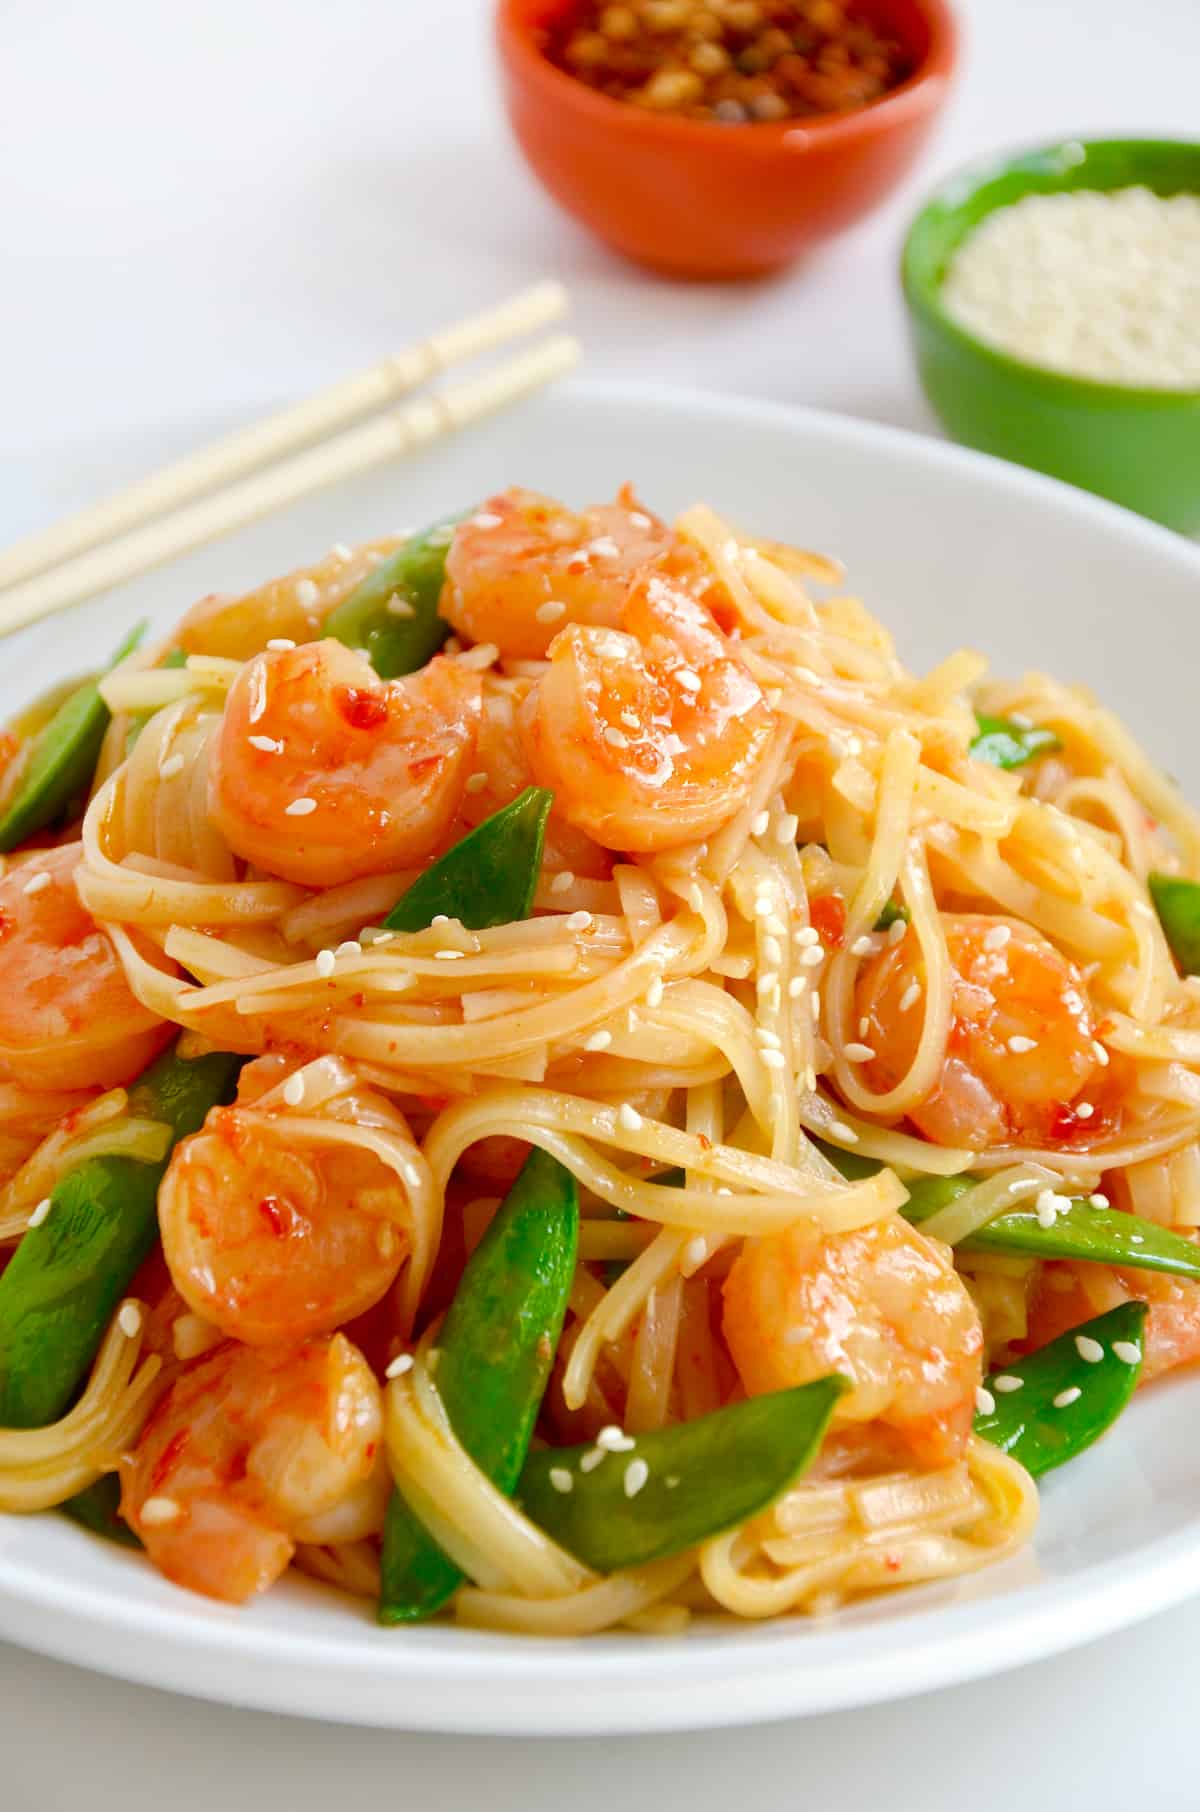 Stir-fried shrimp with snap peas and sesame seeds atop noodles in a white bowl with chopsticks.